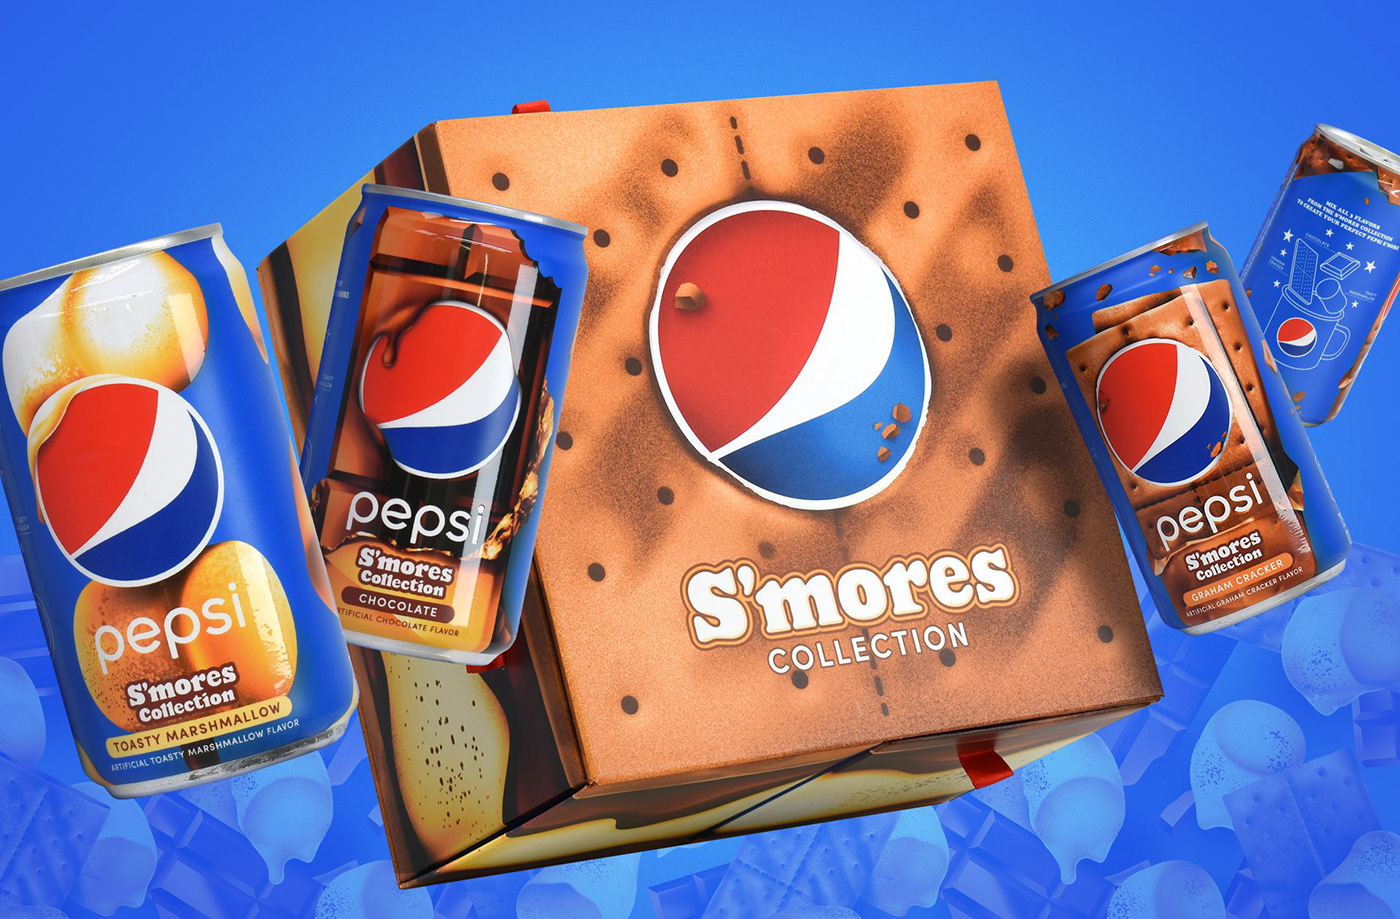 Influencer Unboxing Experience promoting the limited edition Pepsi S’mores collection.